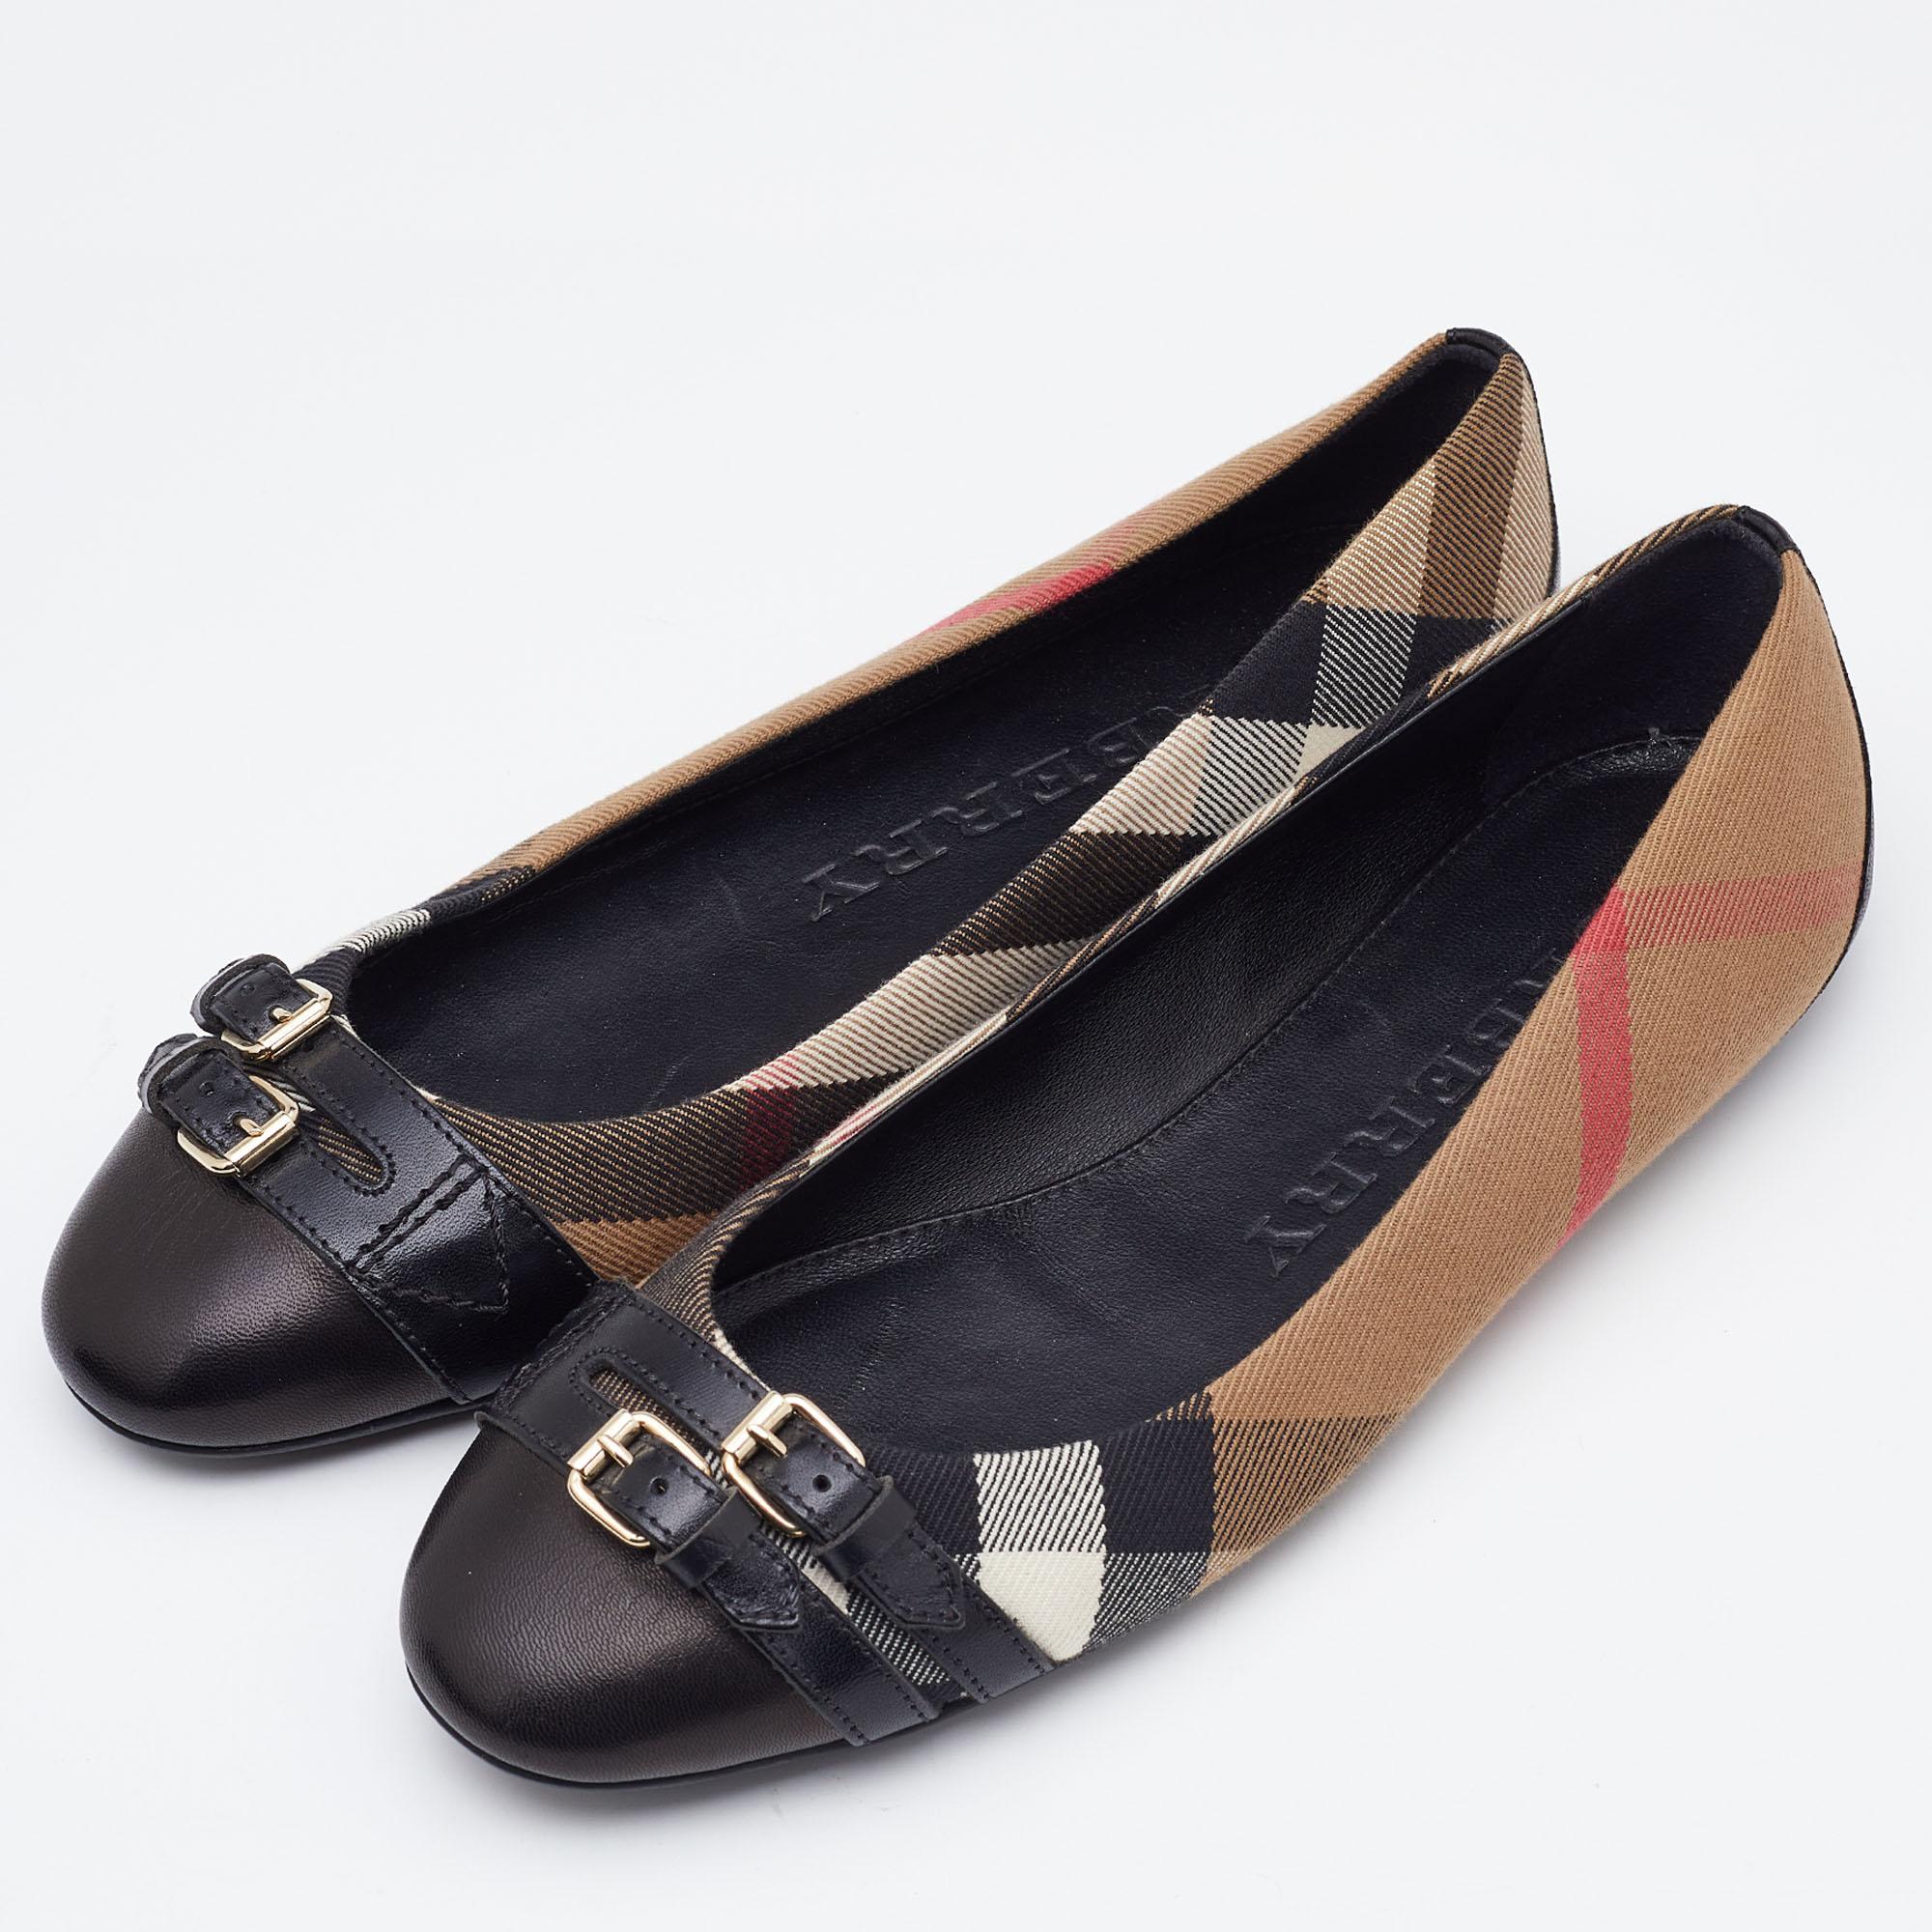 

Burberry Beige/Black Nova Check Canvas and Leather Avonwick Buckle Detail Ballet Flats Size